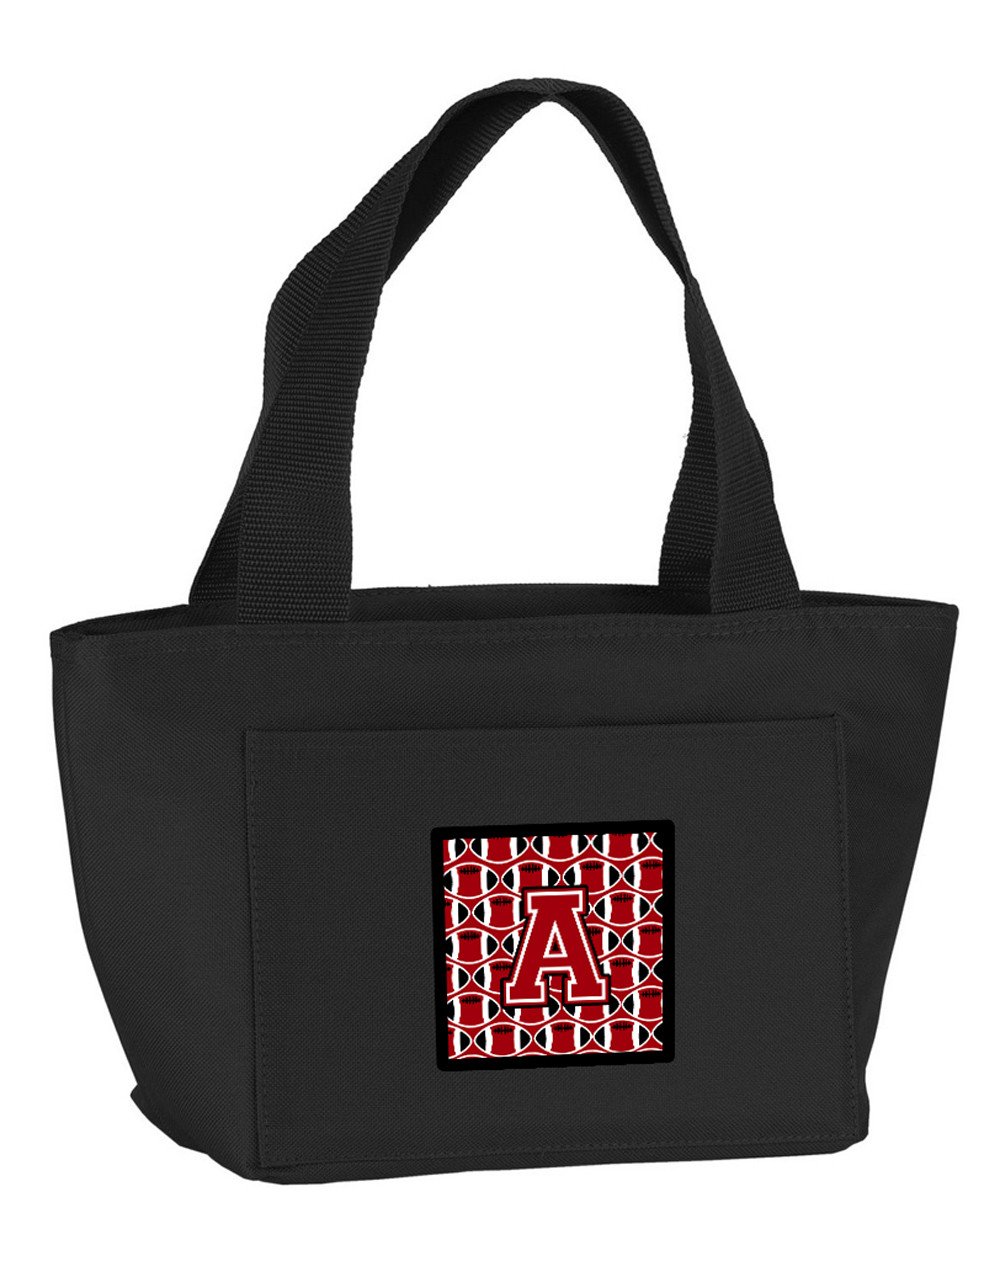 Letter A Football Red, Black and White Lunch Bag CJ1073-ABK-8808 by Caroline's Treasures